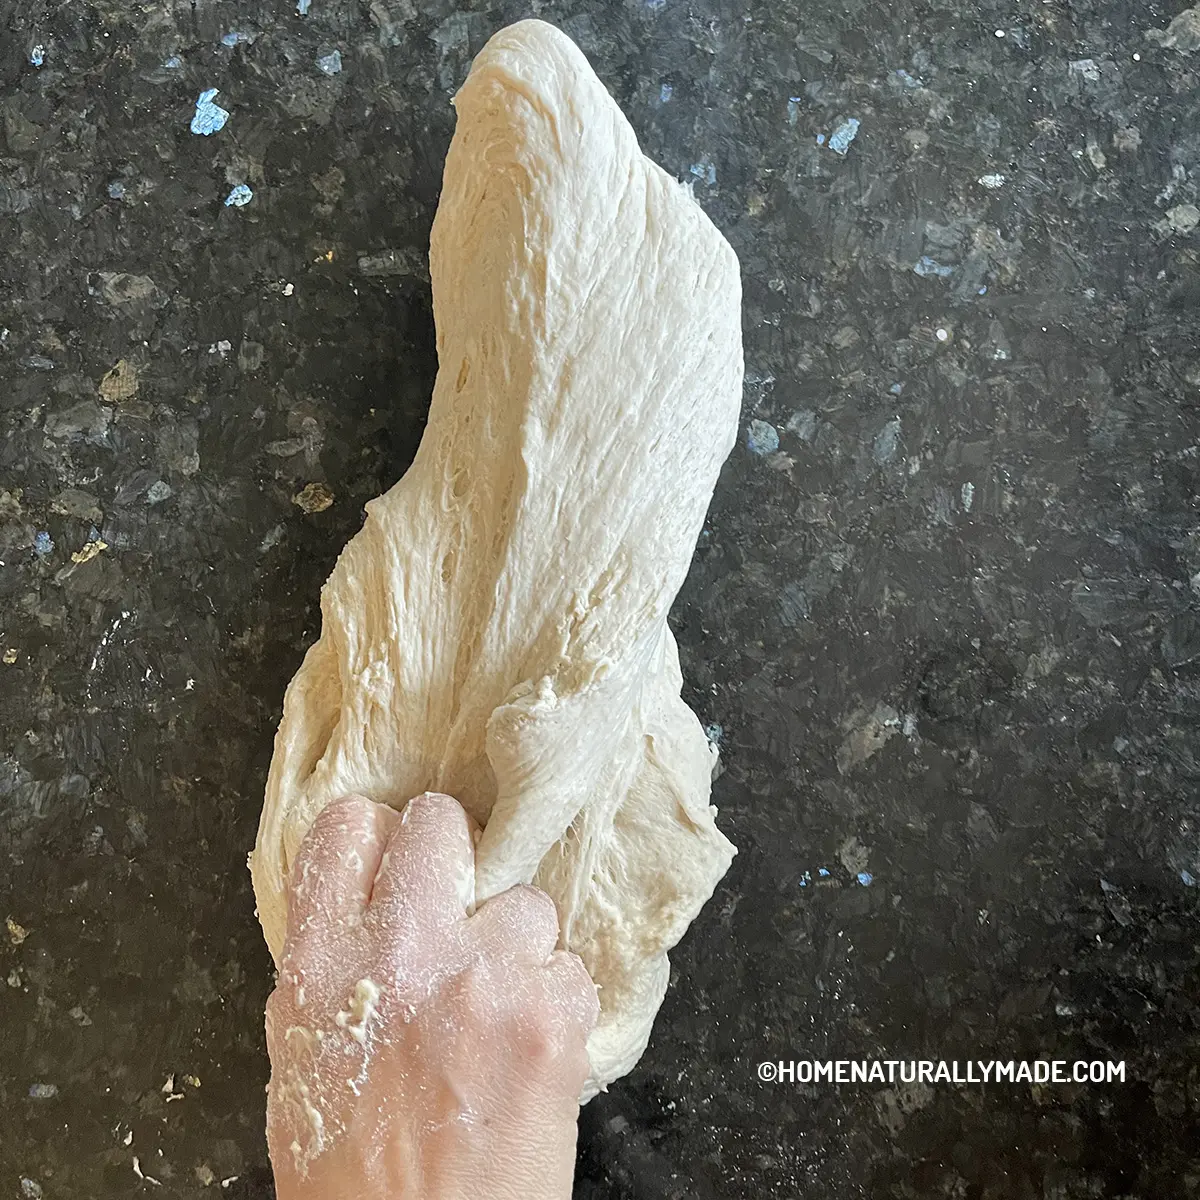 slap the dough against hard surface for making bread